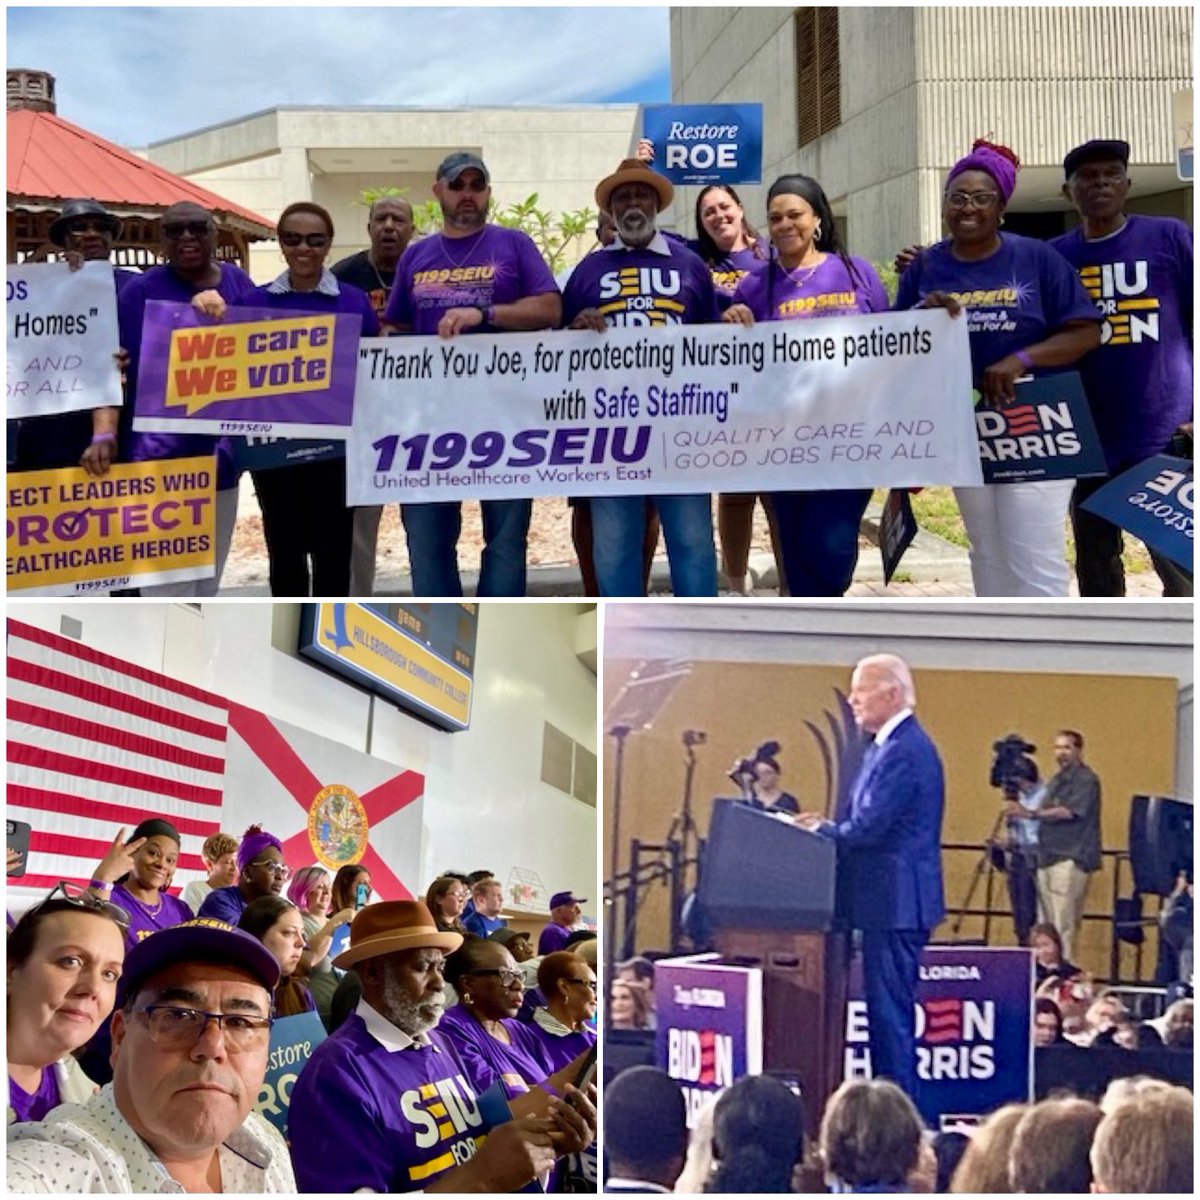 Healthcare workers are in Tampa at an event with President Joe Biden to say thank you to him and his administration for supporting national nursing home staffing standards that will protect seniors and caregivers. #CareIsEssential #WeCareForFL ⁦@1199SEIU⁩ ⁦@JoeBiden⁩